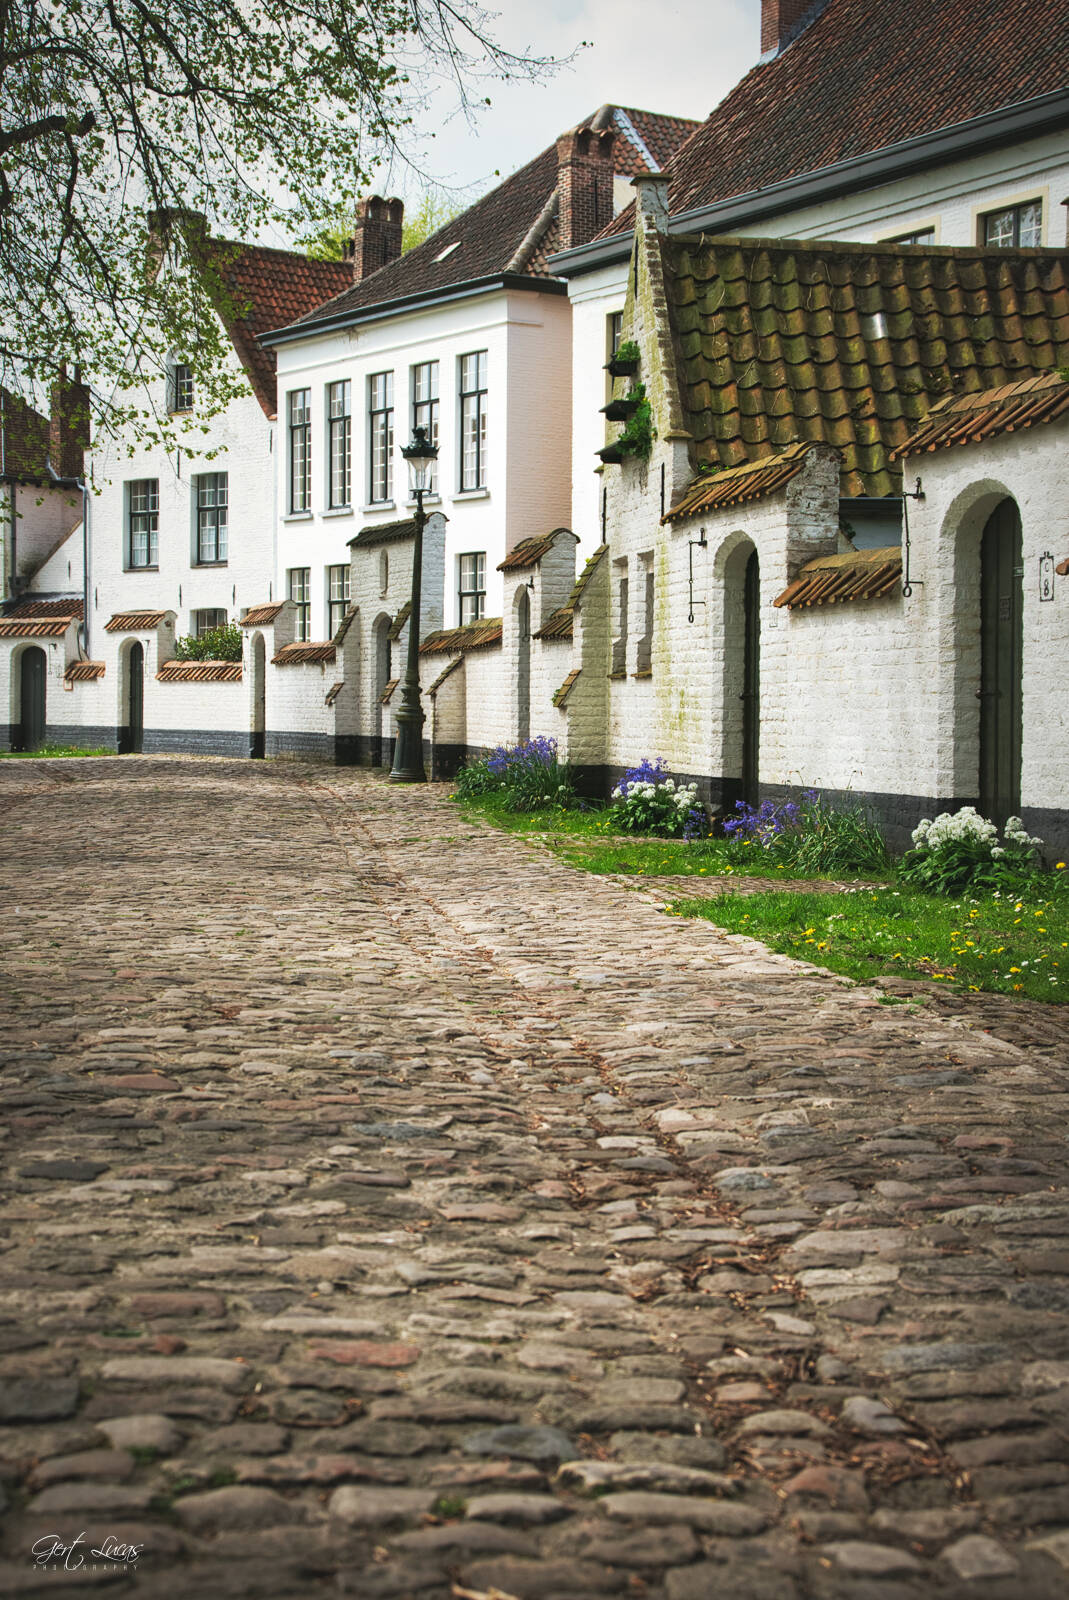 Image of Beguinage by Gert Lucas